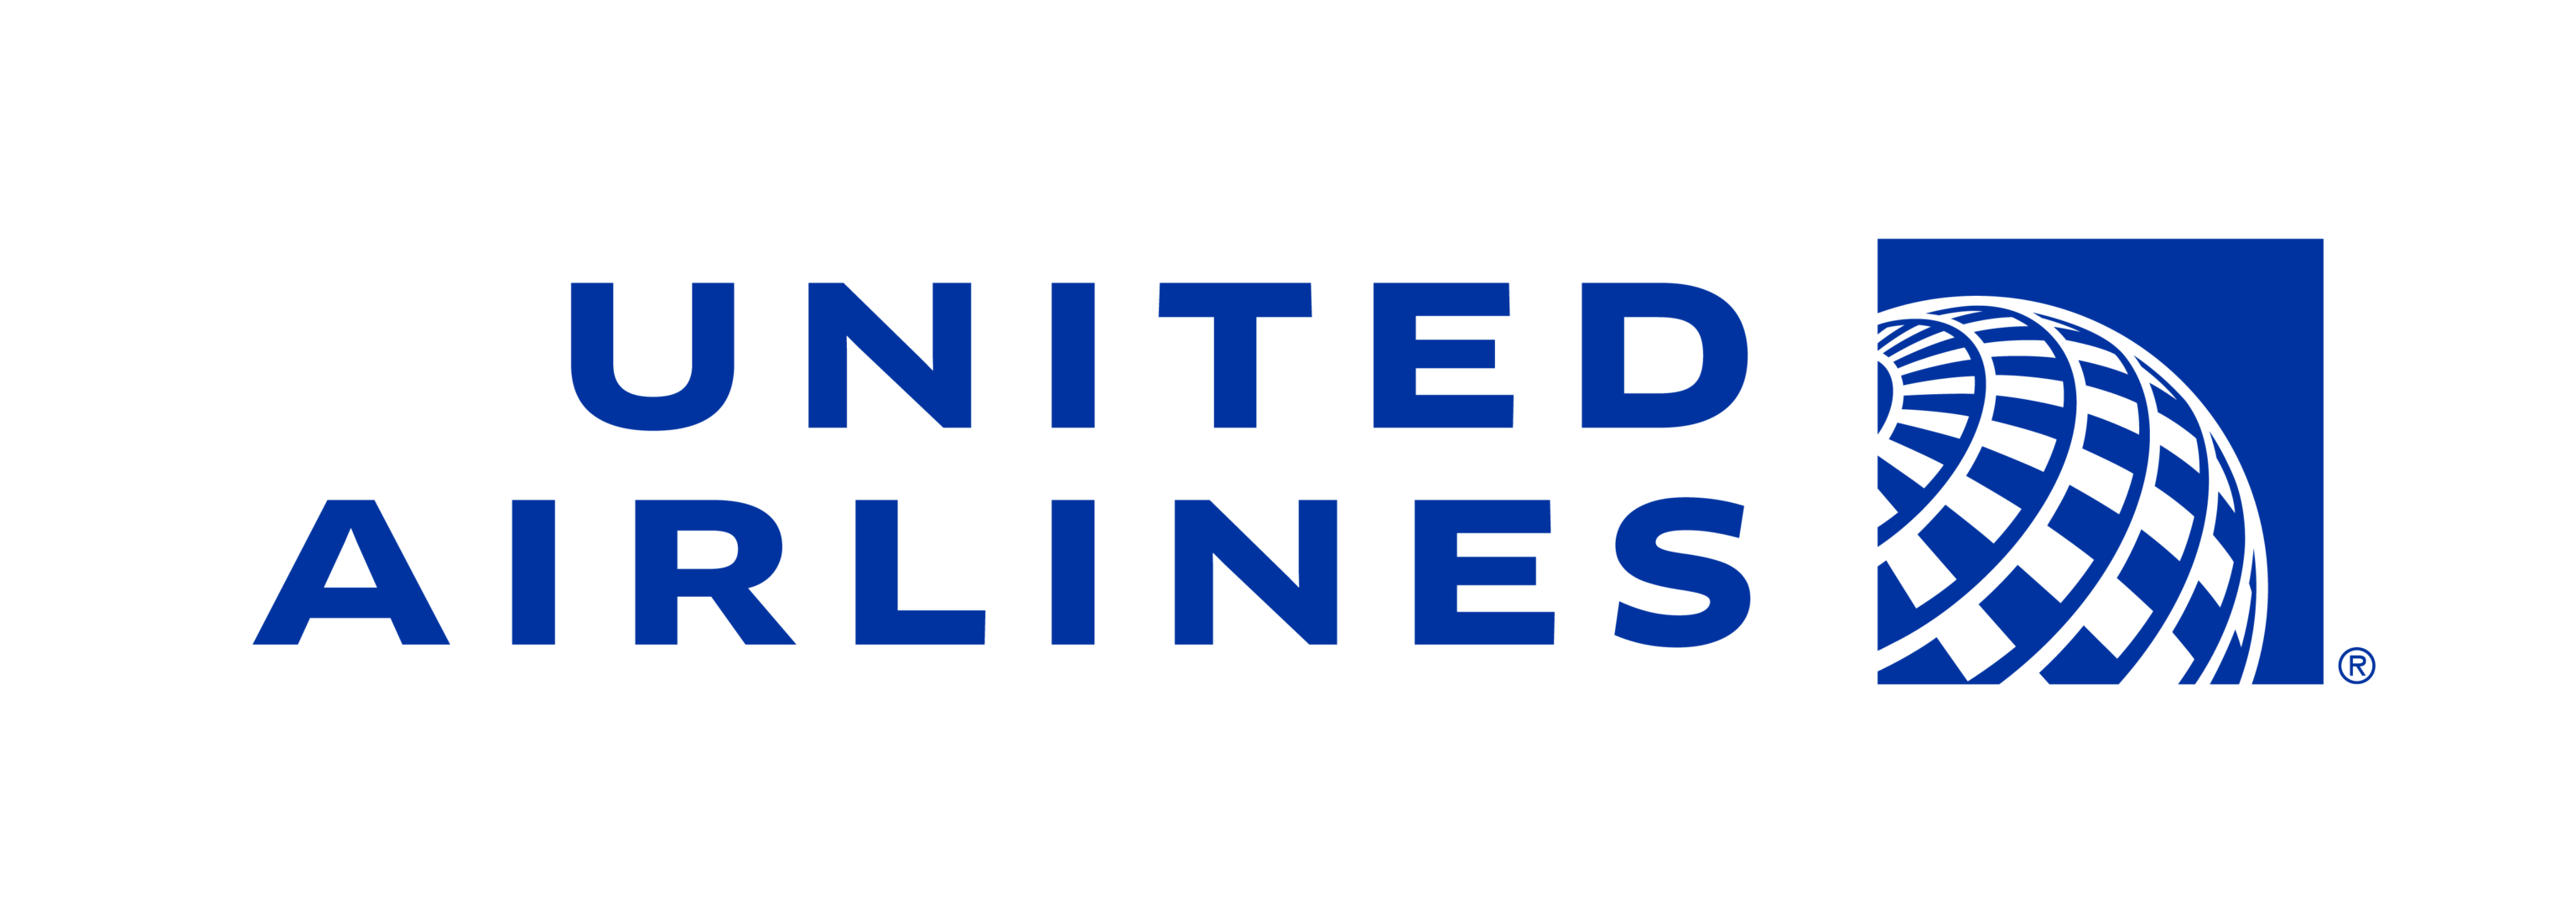 United Airlines New Logo - United Airlines Logo Png (image in Collection)